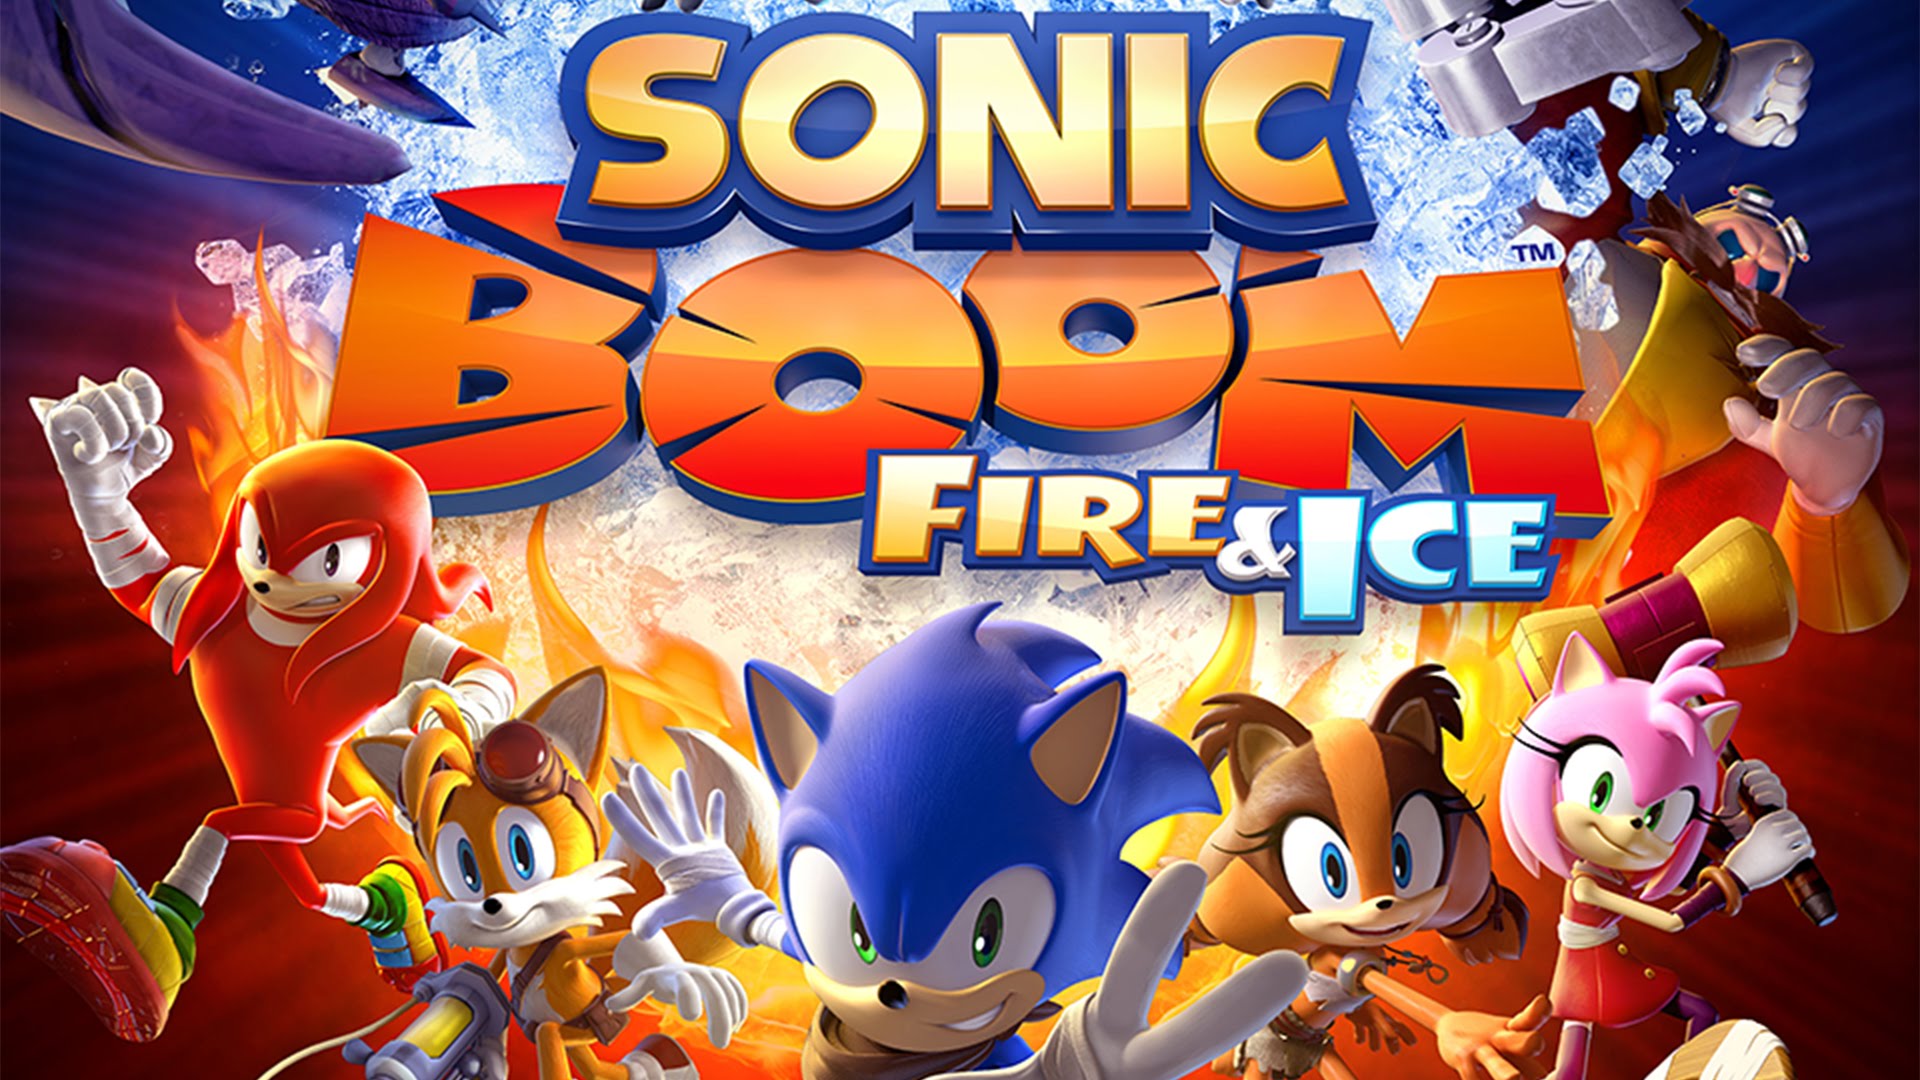 6 Reasons Why Sonic Boom: Fire & Ice Speeds Is Great